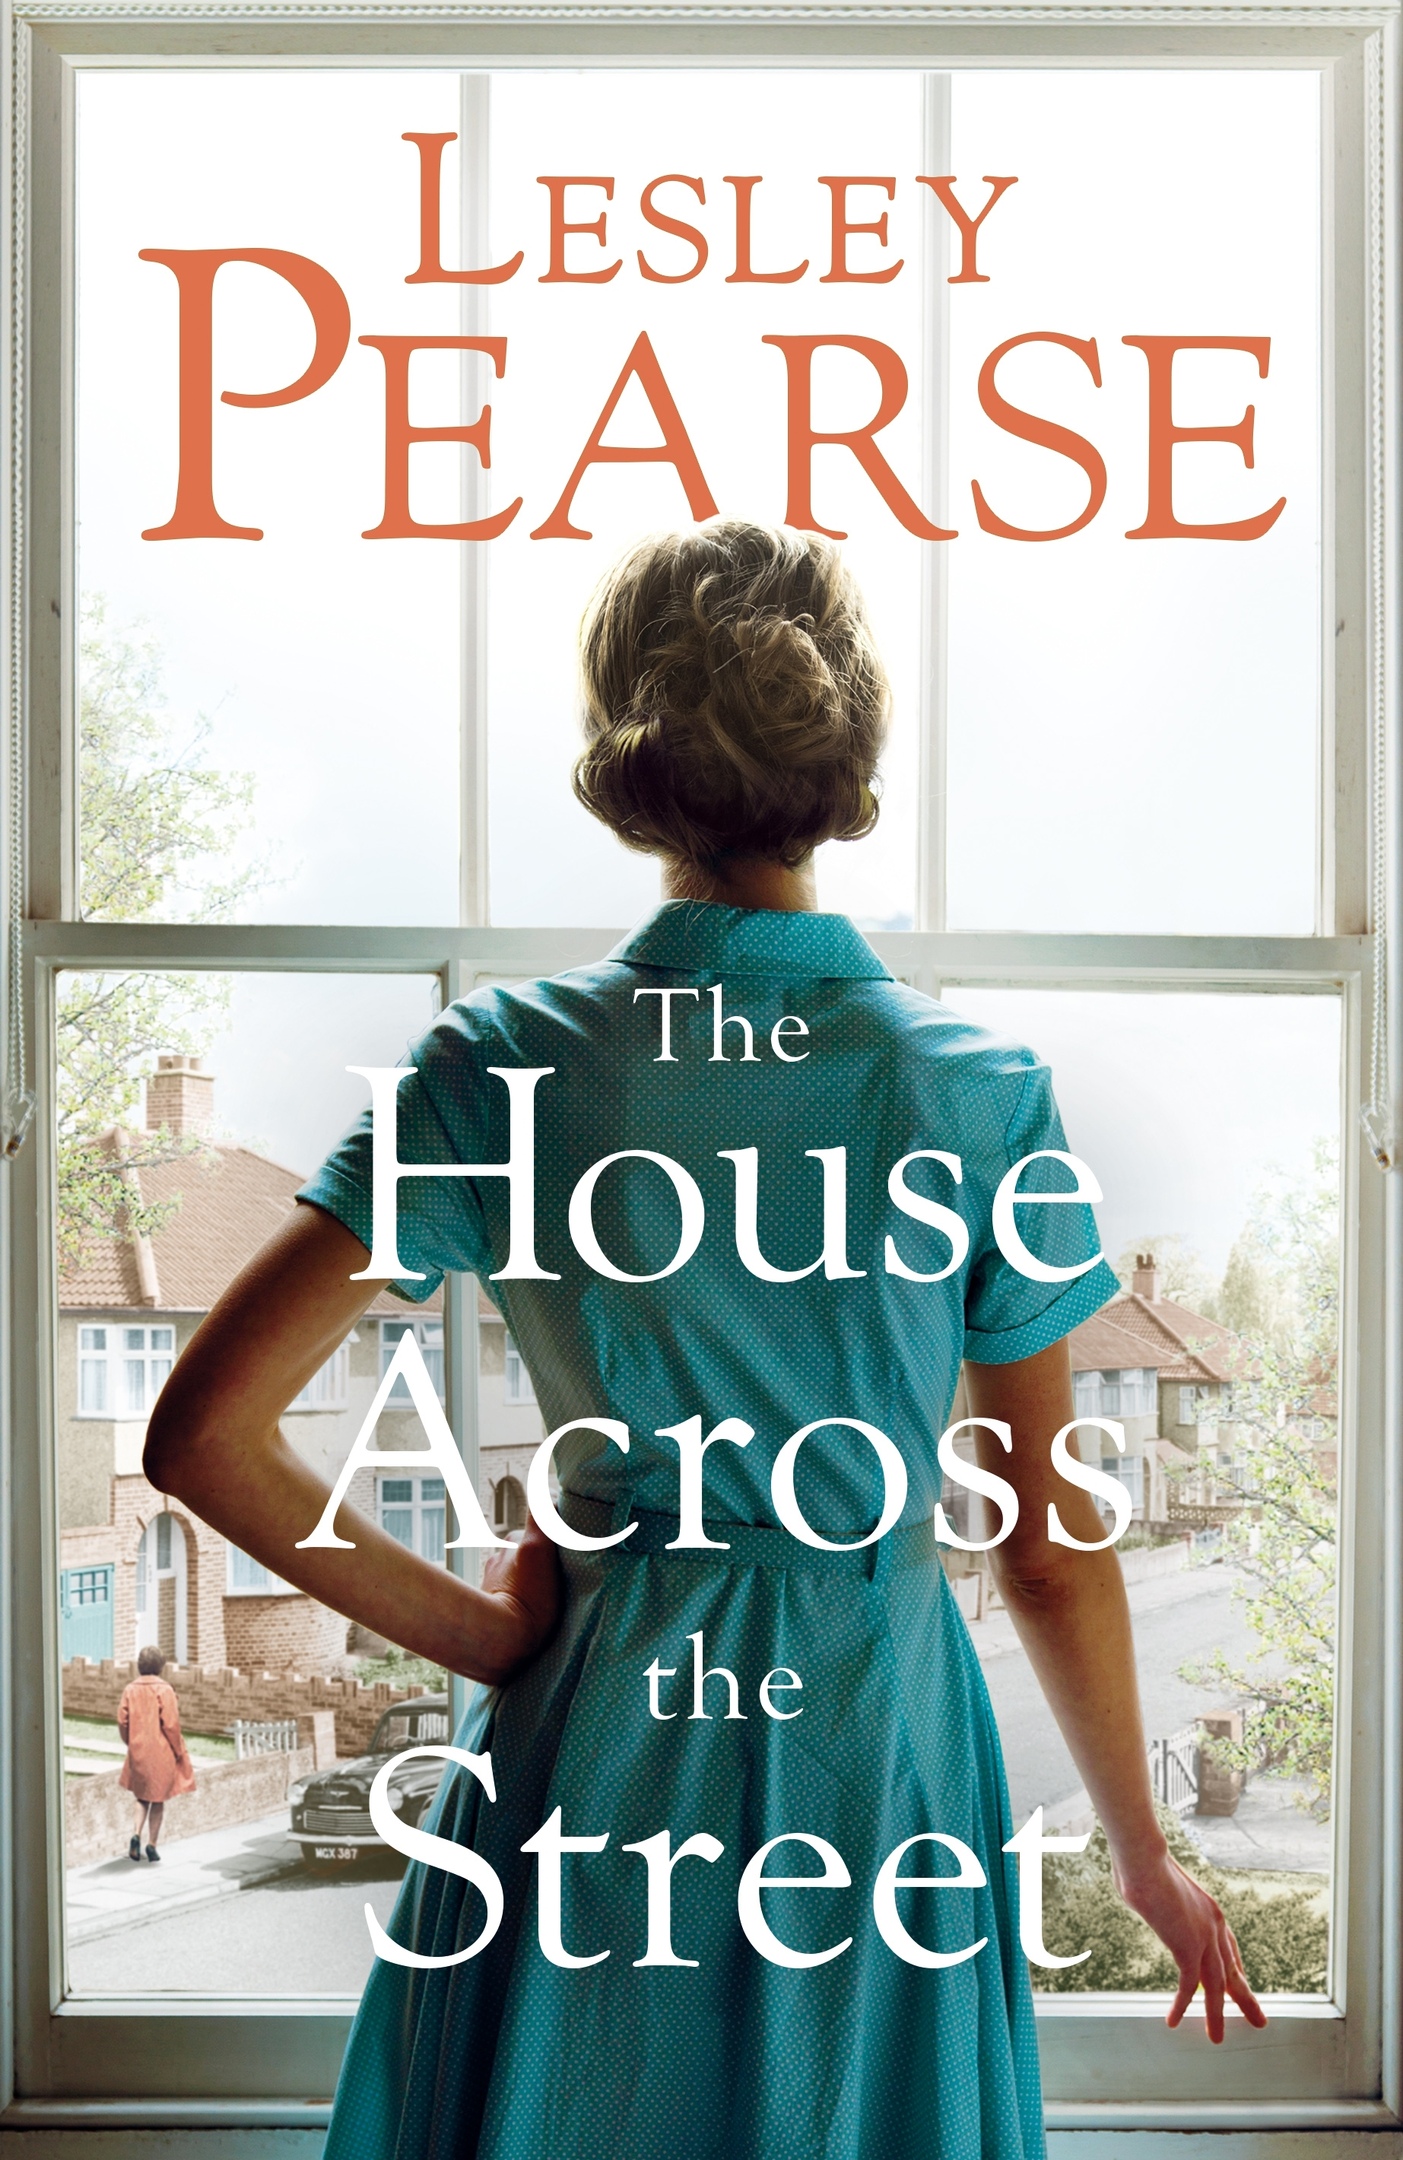 Lesley Pearse – The House Across The Street